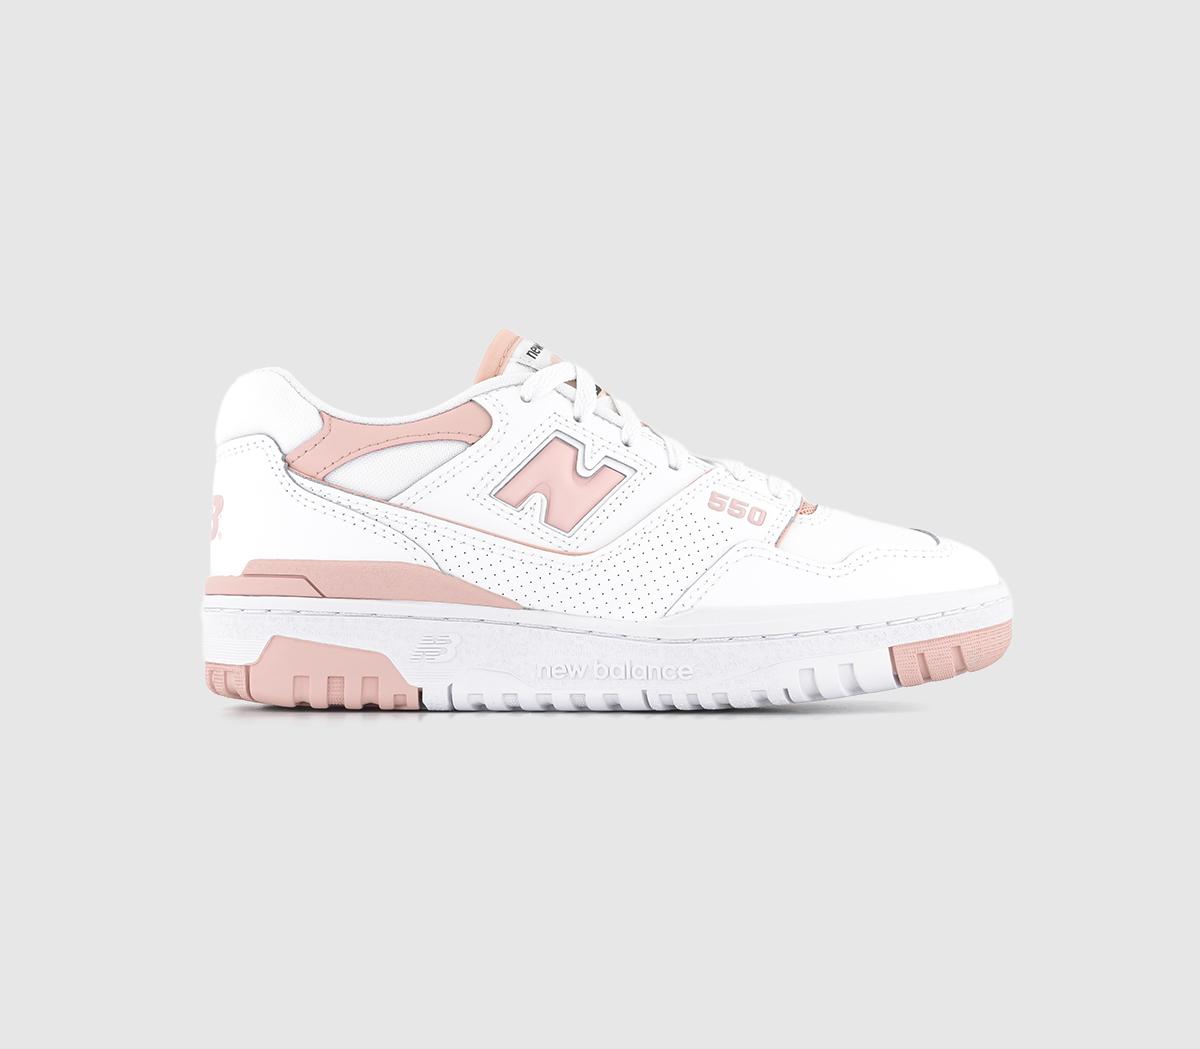 New Balance BB550 Trainers Pink - Women's Trainers